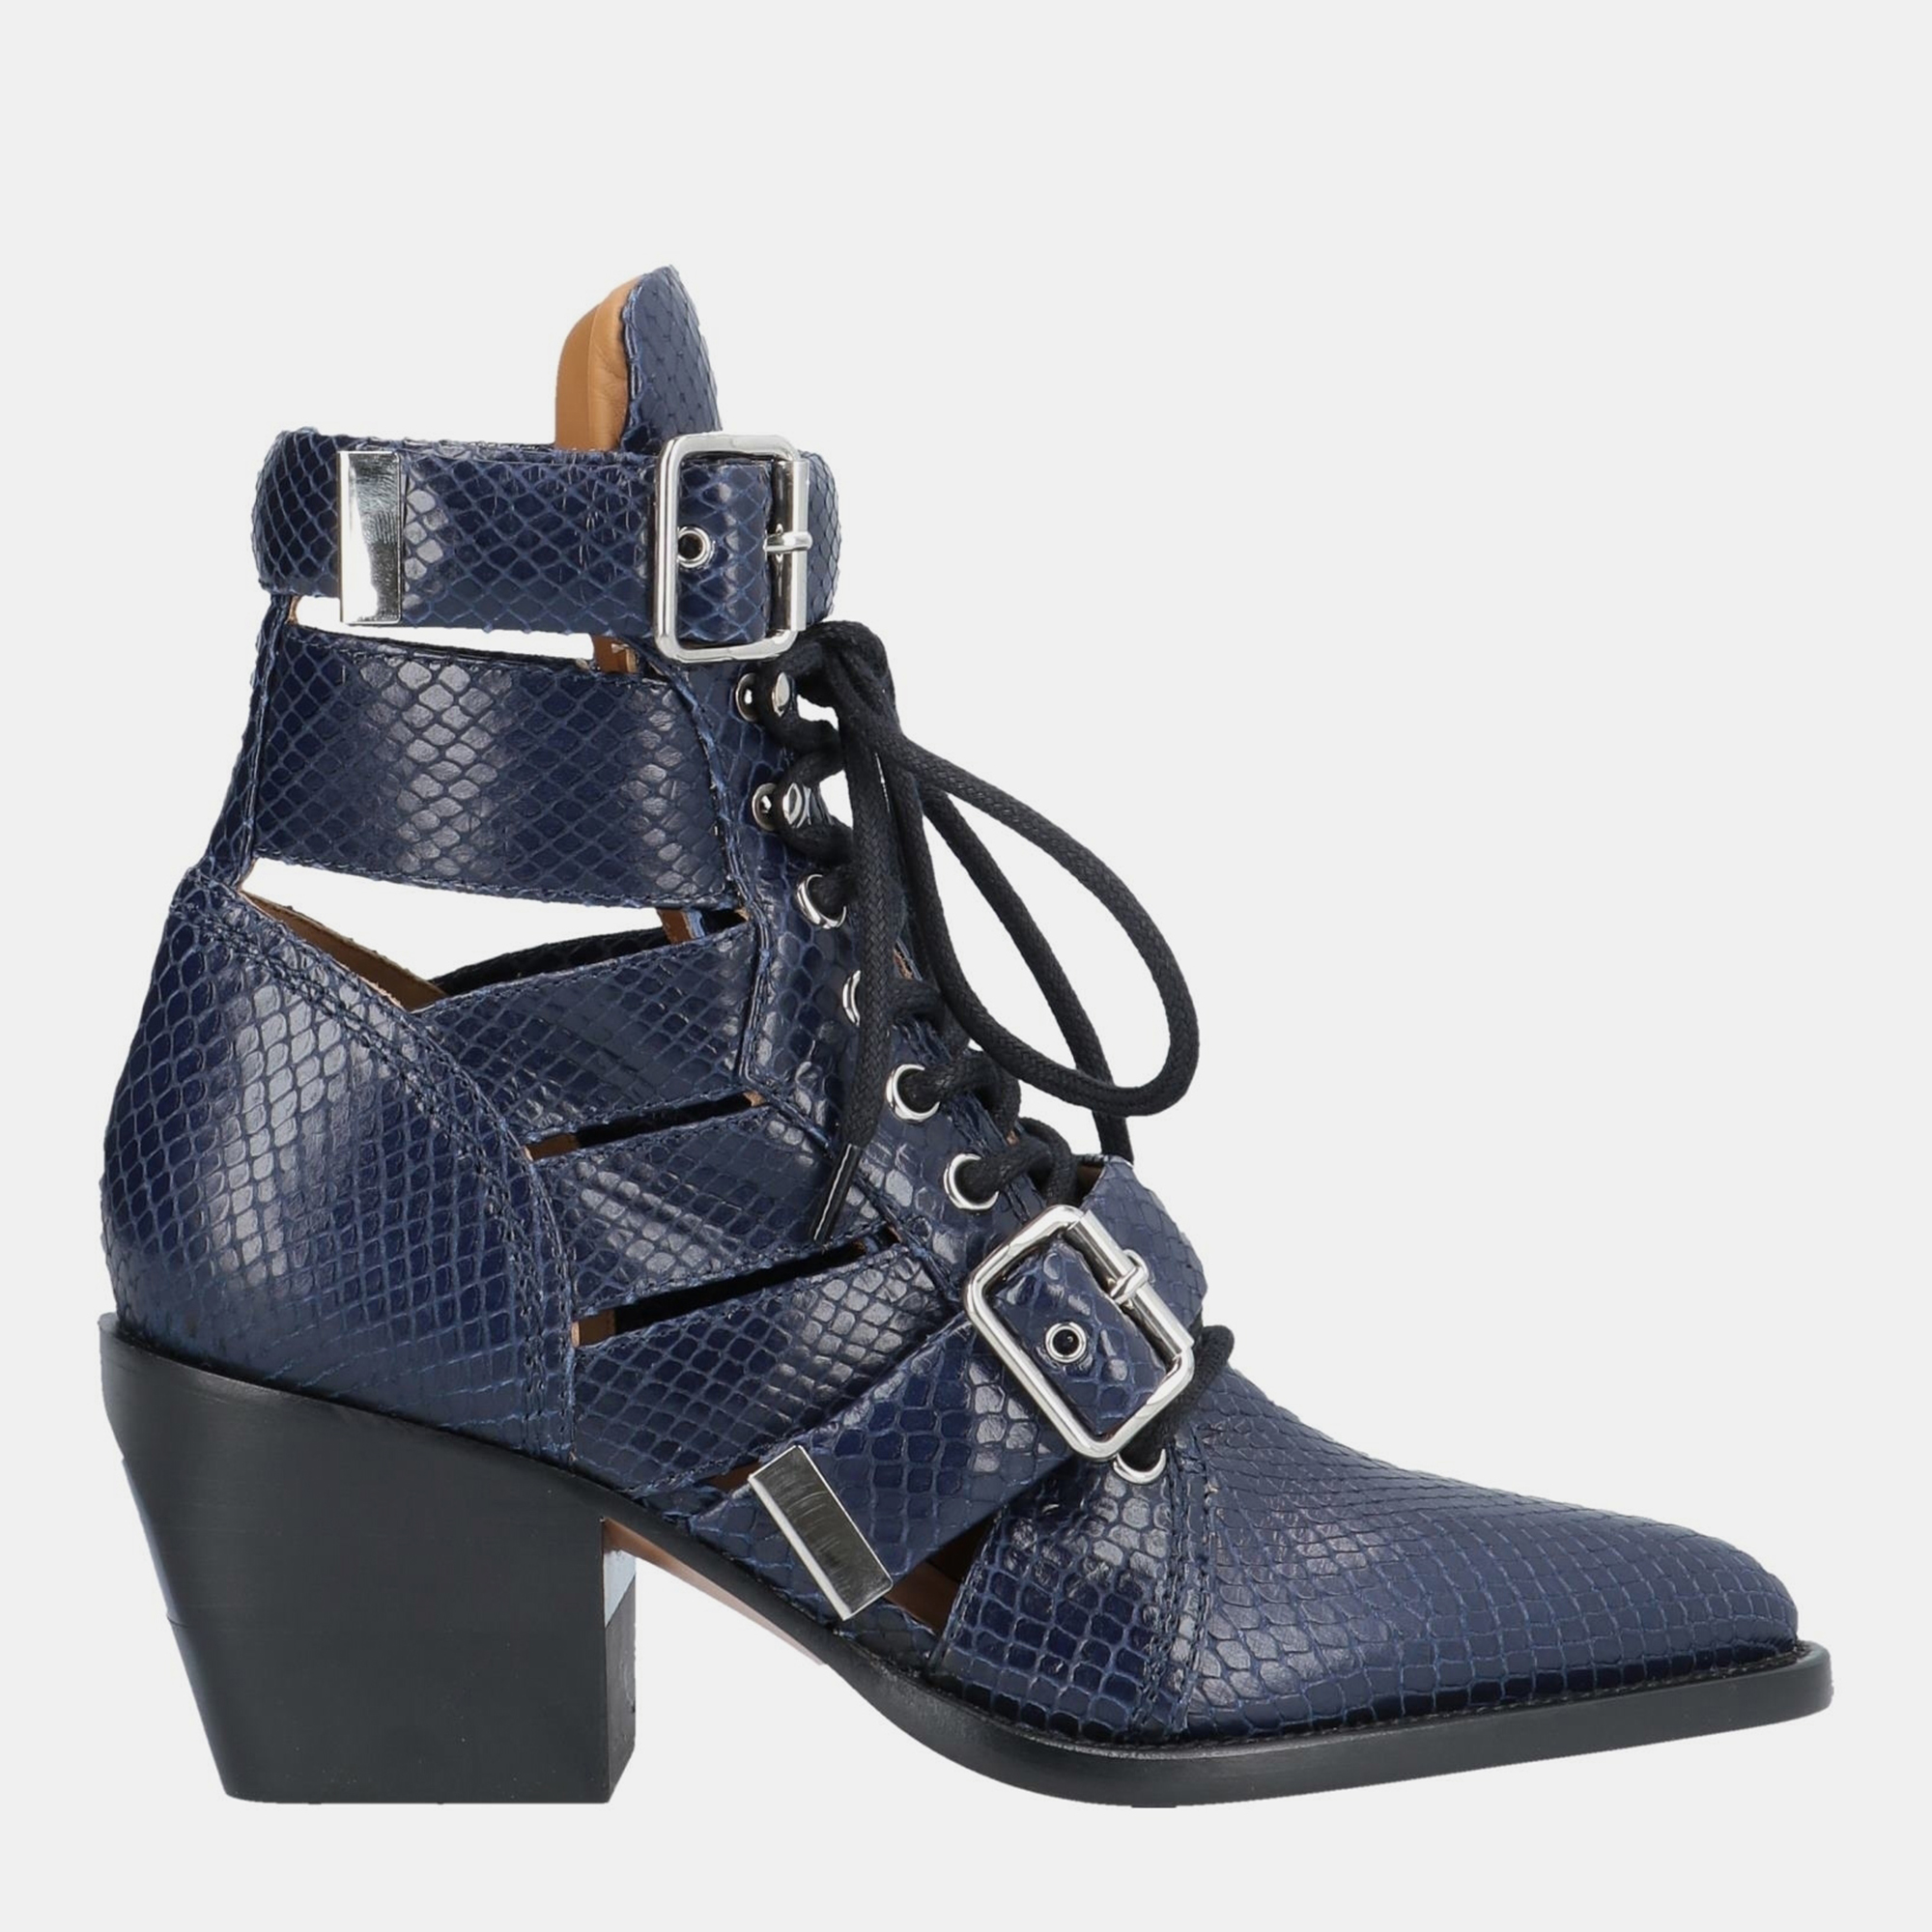 Chloe snakeskin embossed leather ankle boots 37